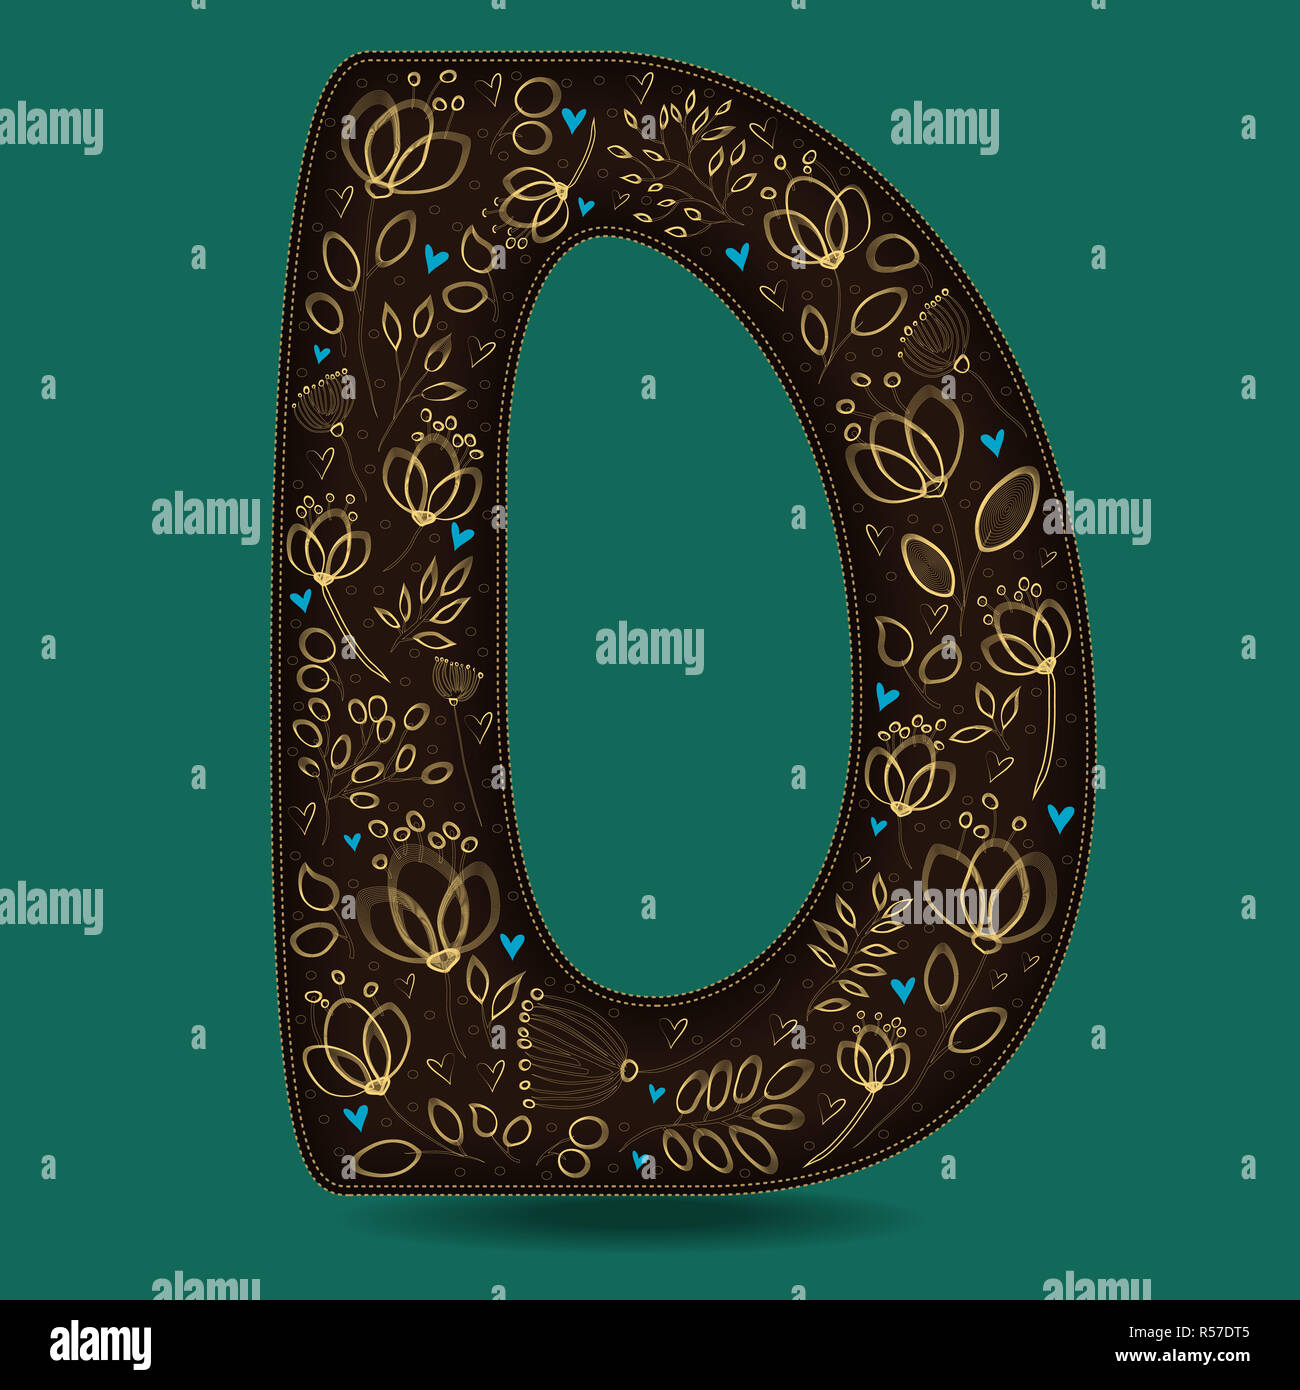 The Letter D with Golden Floral Decor. Stock Photo